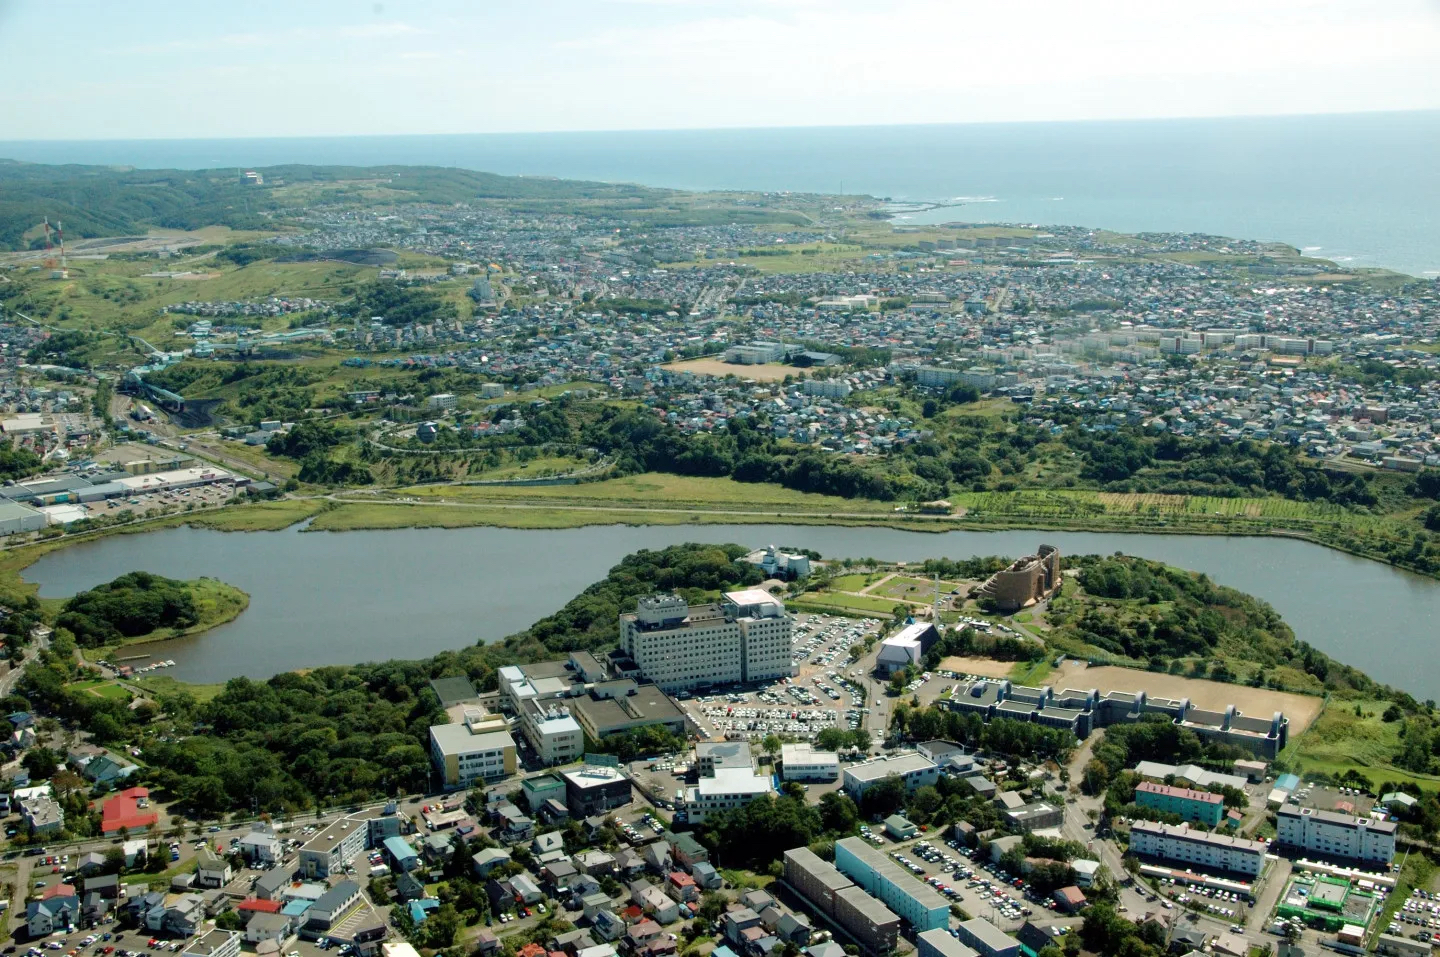 Nature surrounded by the city! Here is one of the best bird watching spots in East Hokkaido!